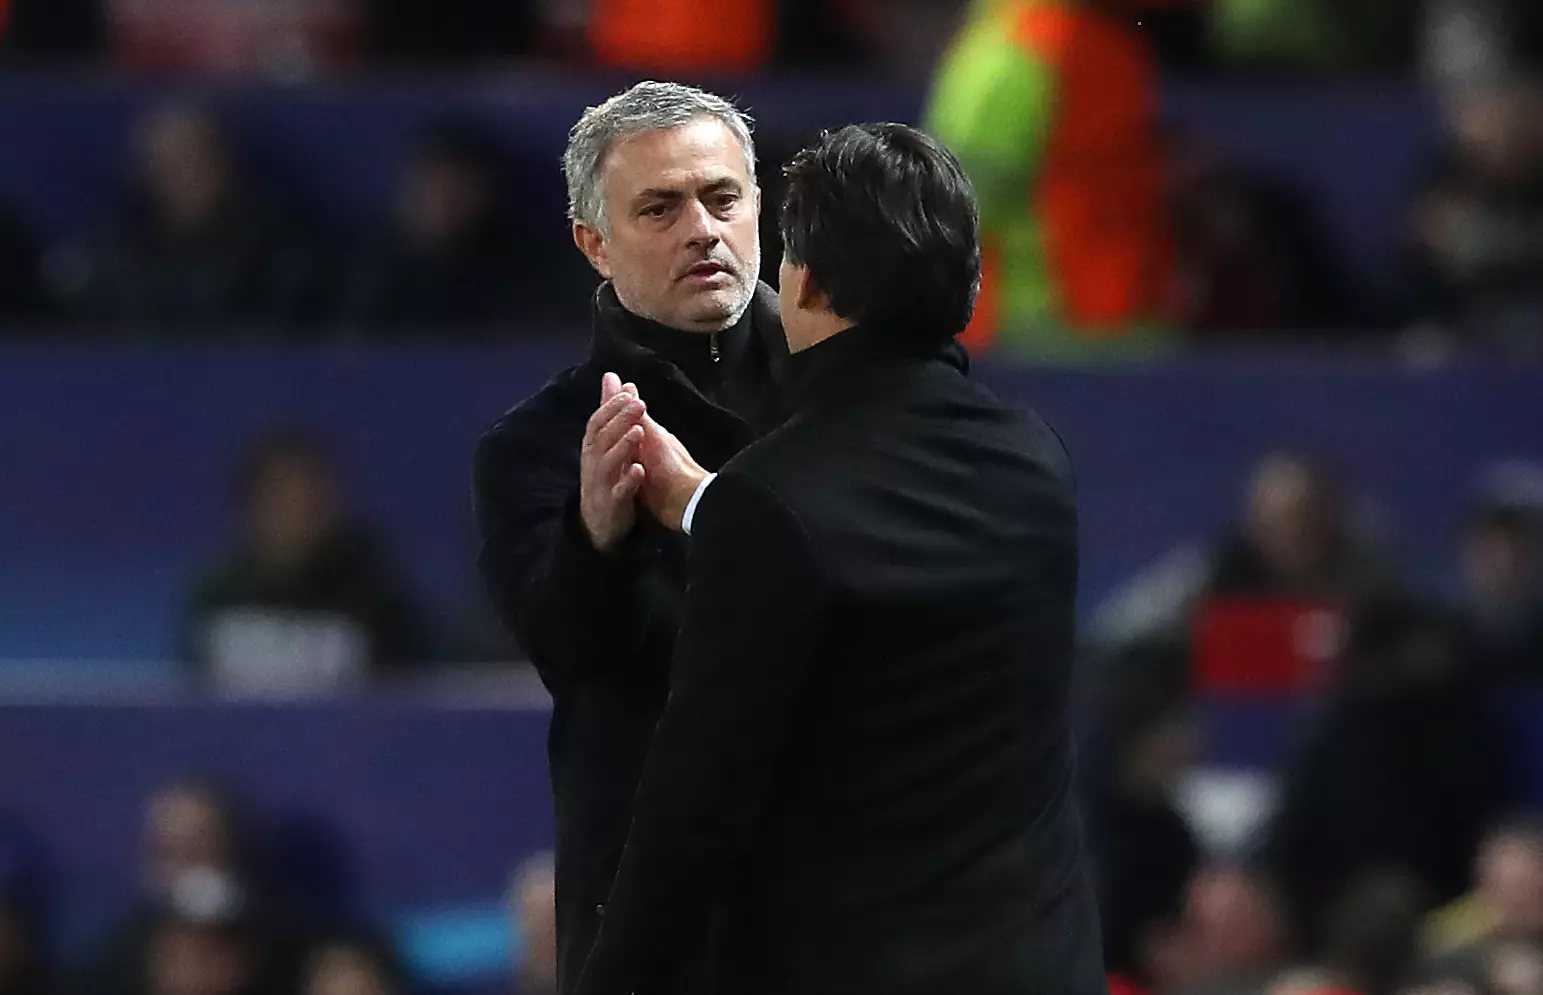 At least Mourinho shook hands with Vincenzo Montella. Image: PA Images.